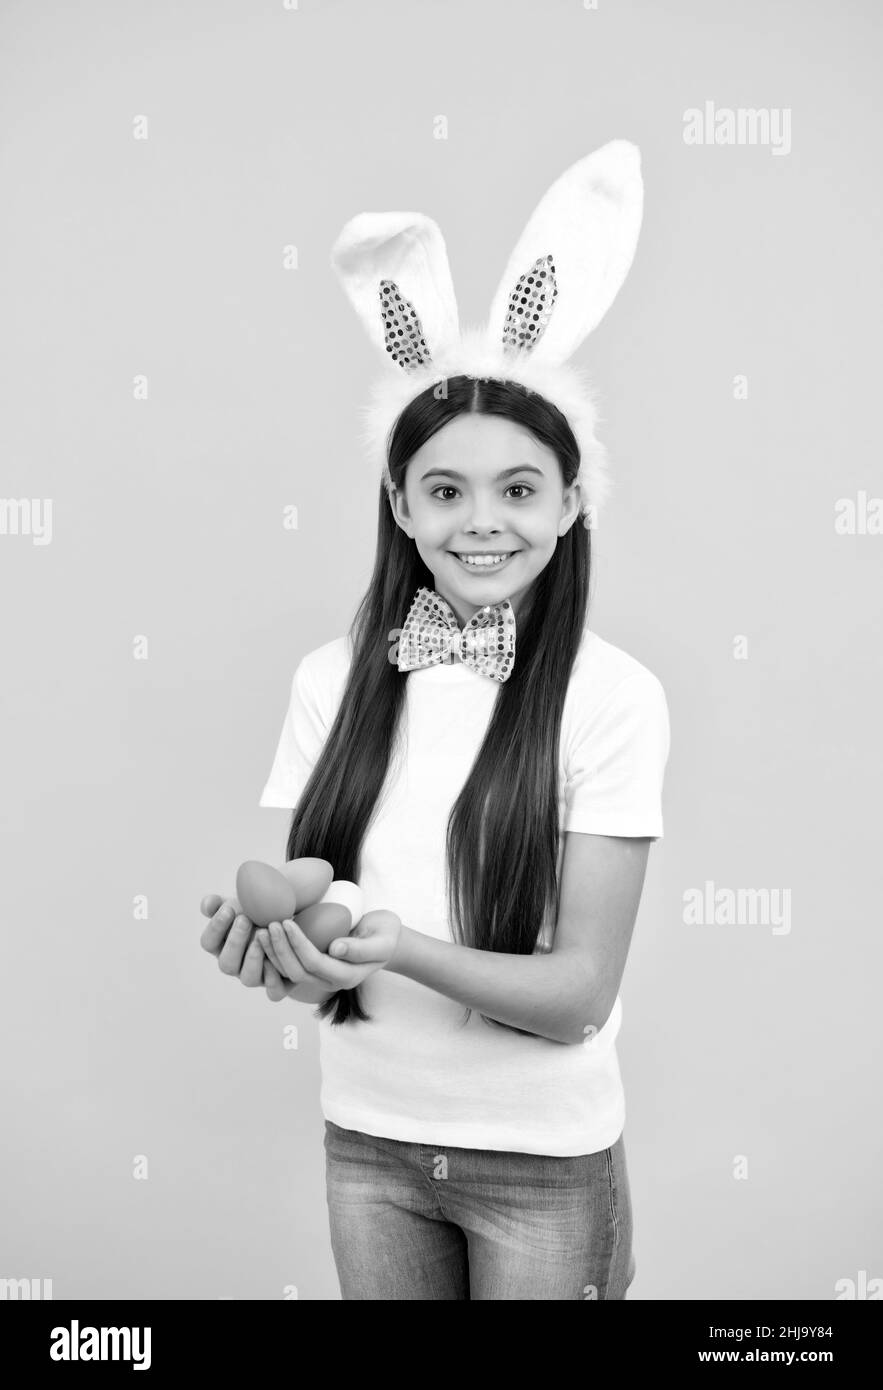 happy easter holiday. funny child in rabbit ears. smiling teenager girl in bow tie. bunny egg hunt. Stock Photo